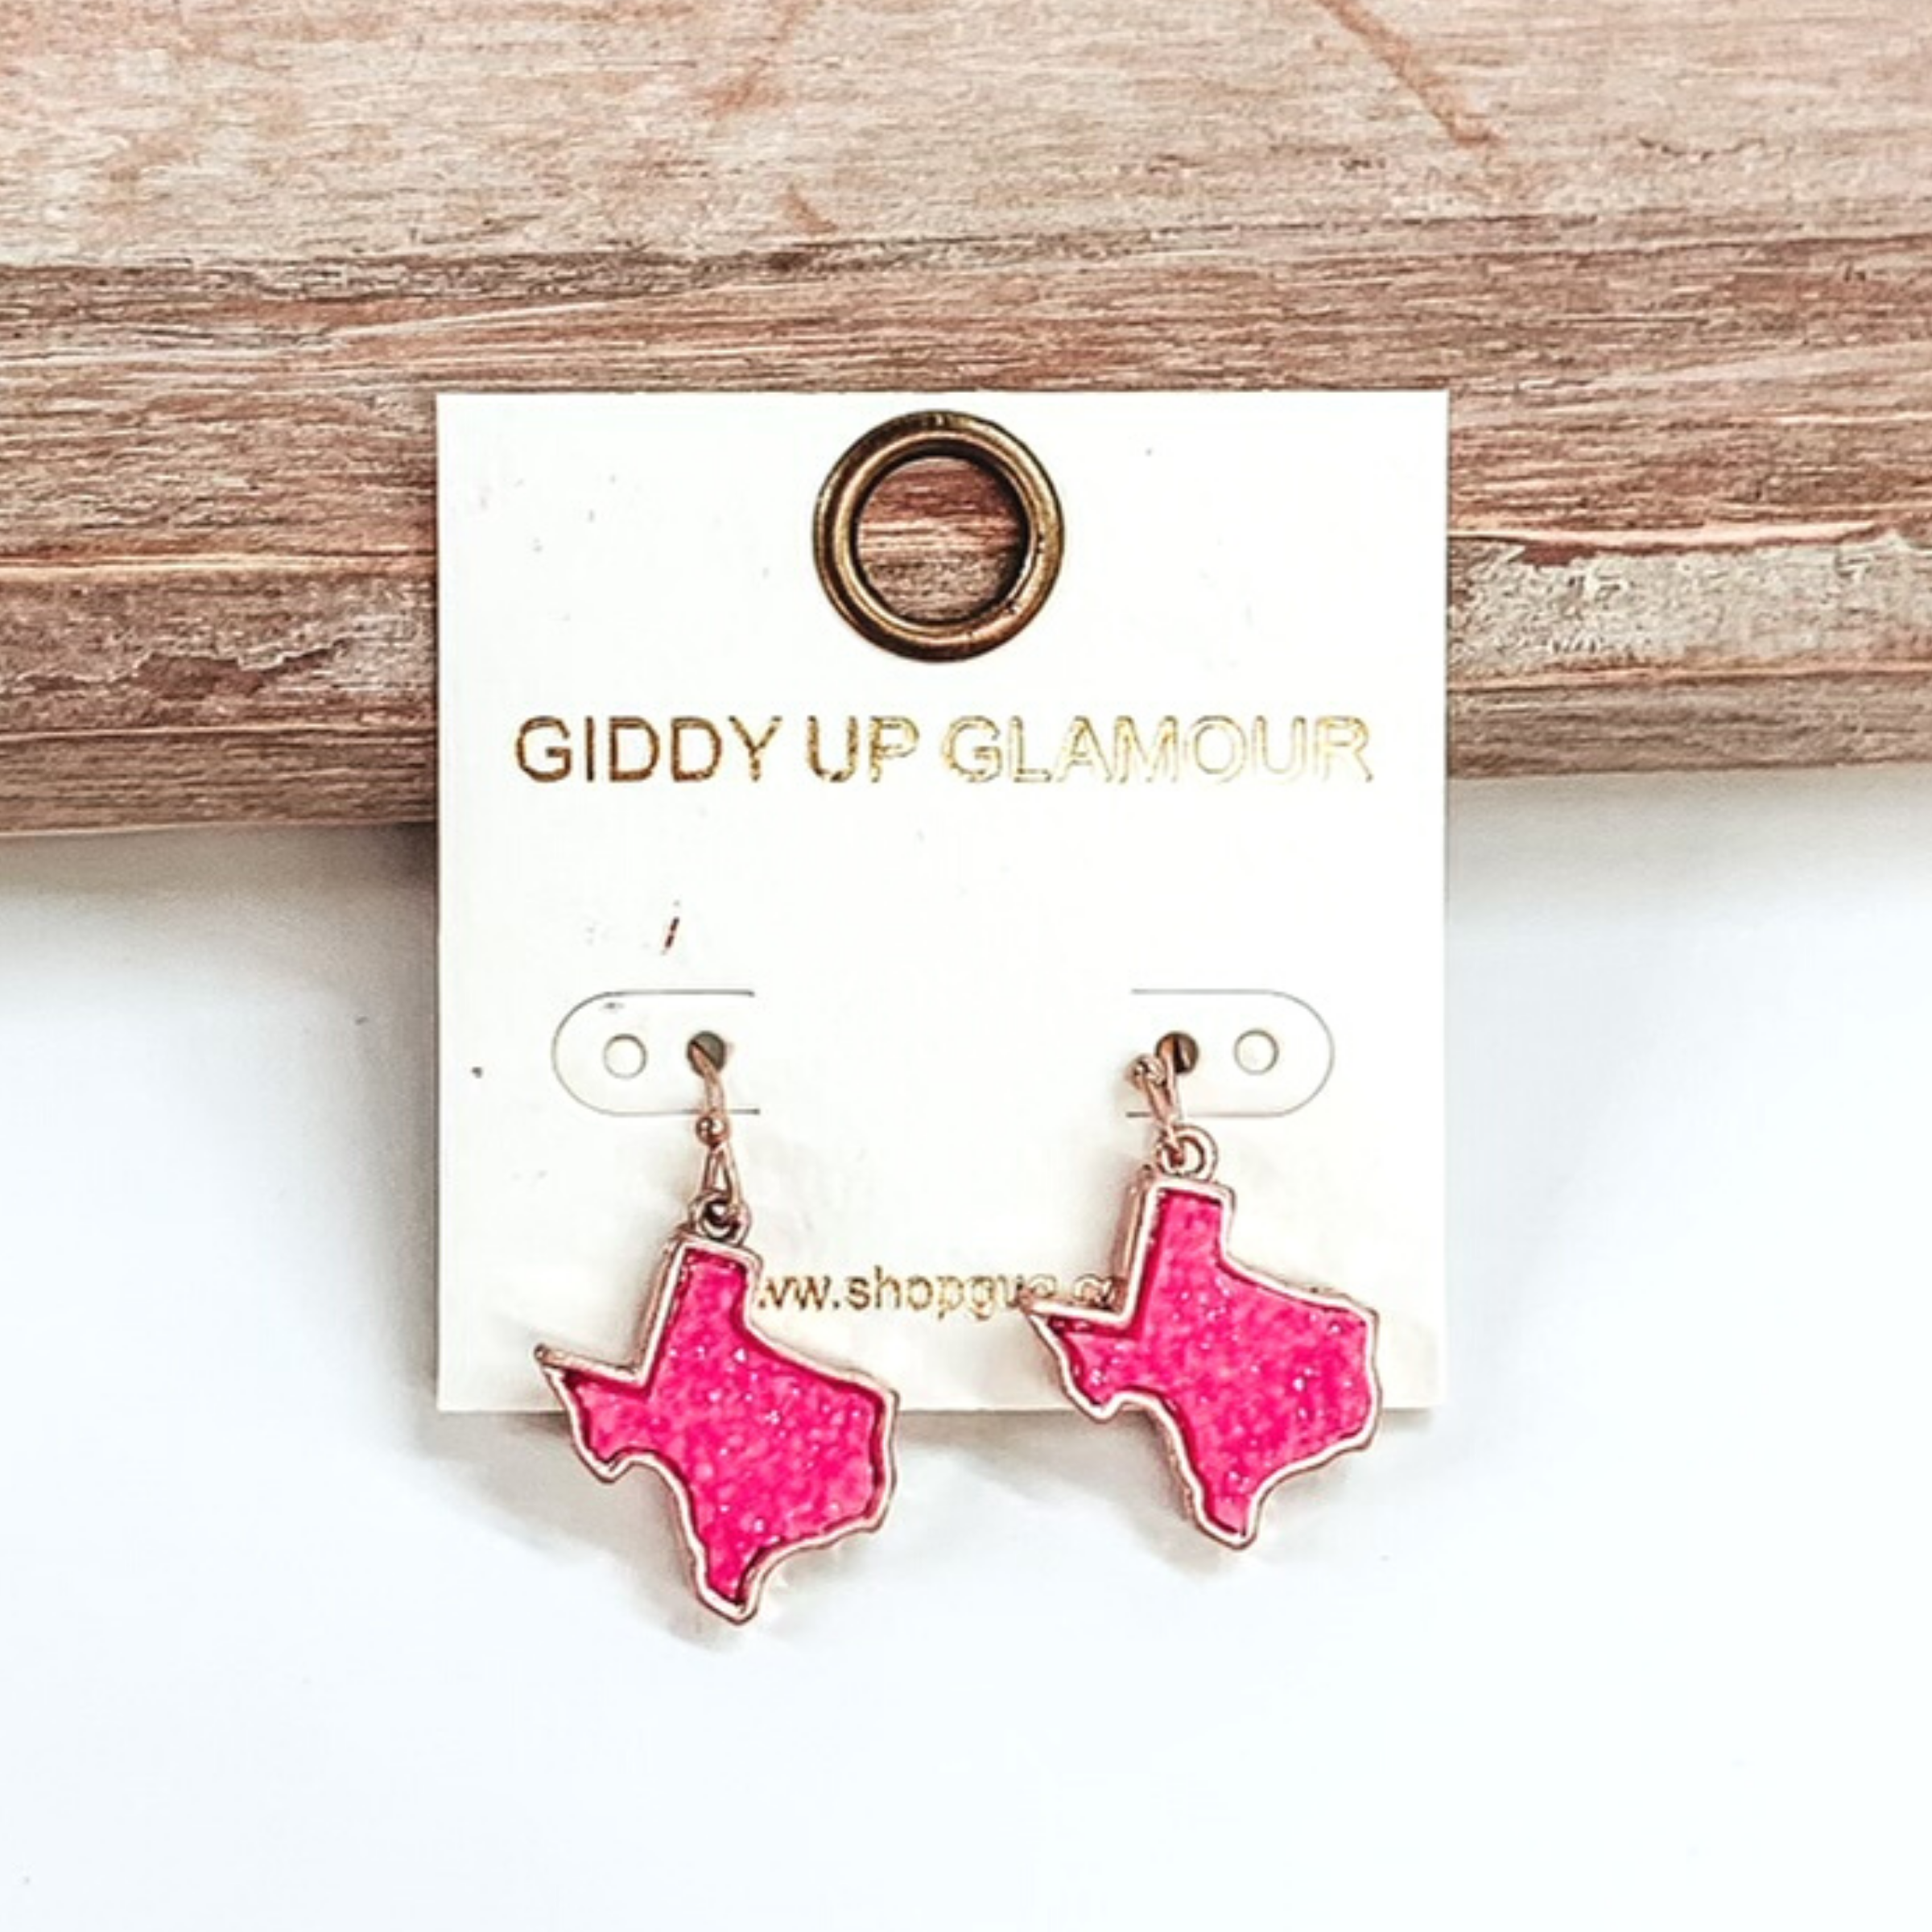 Gold dangle earrings with druzy, neon pink, texas shaped stone. These earrings are pictured on a white earrings holder on a white background, leaning against a tan block.